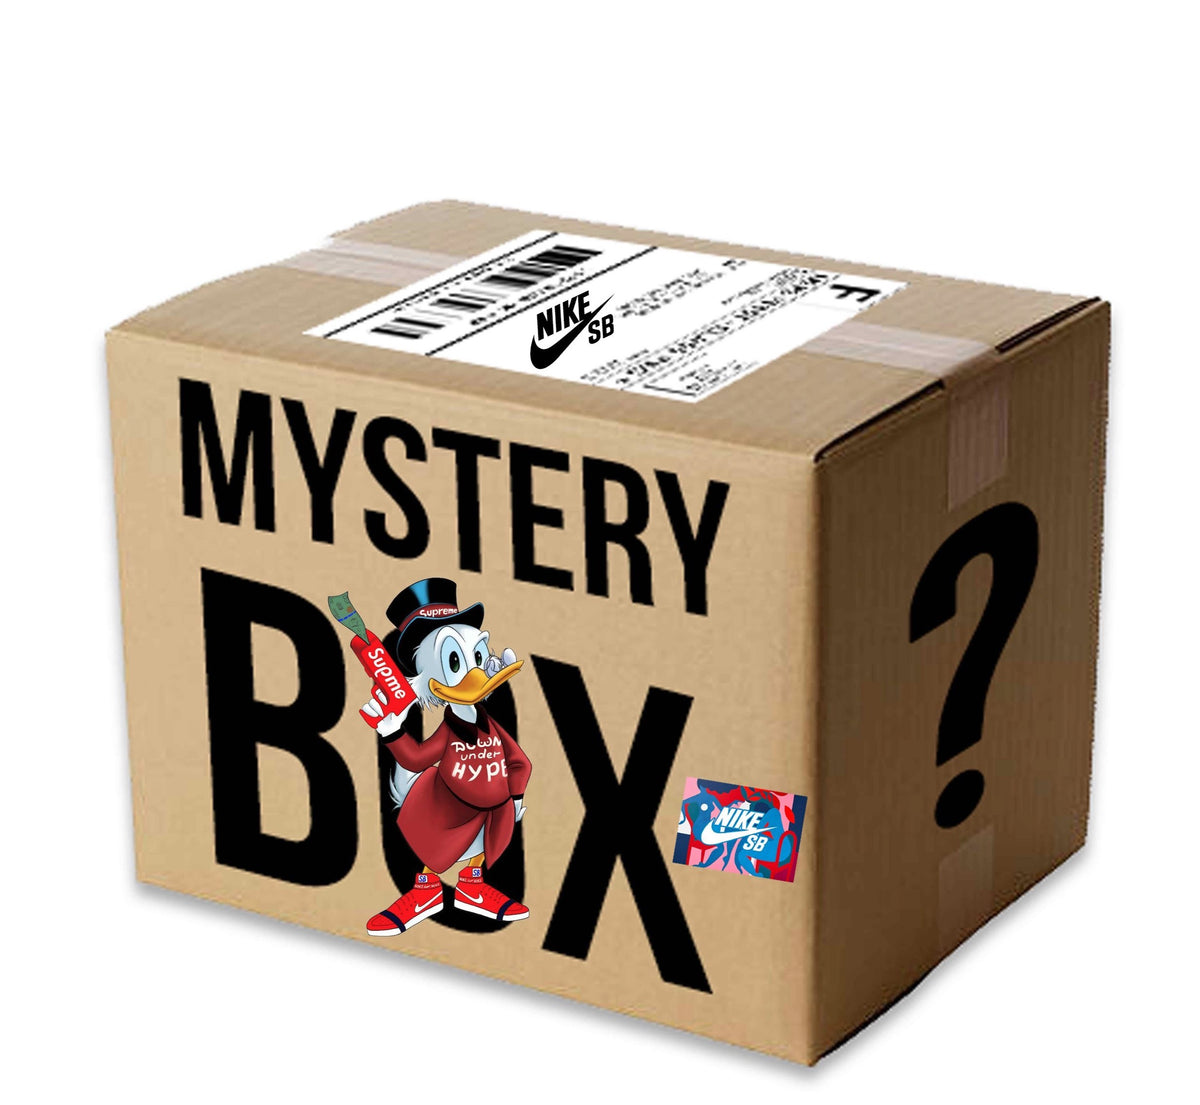 Nike SB Dunk Only MYSTERY BOX – Down 